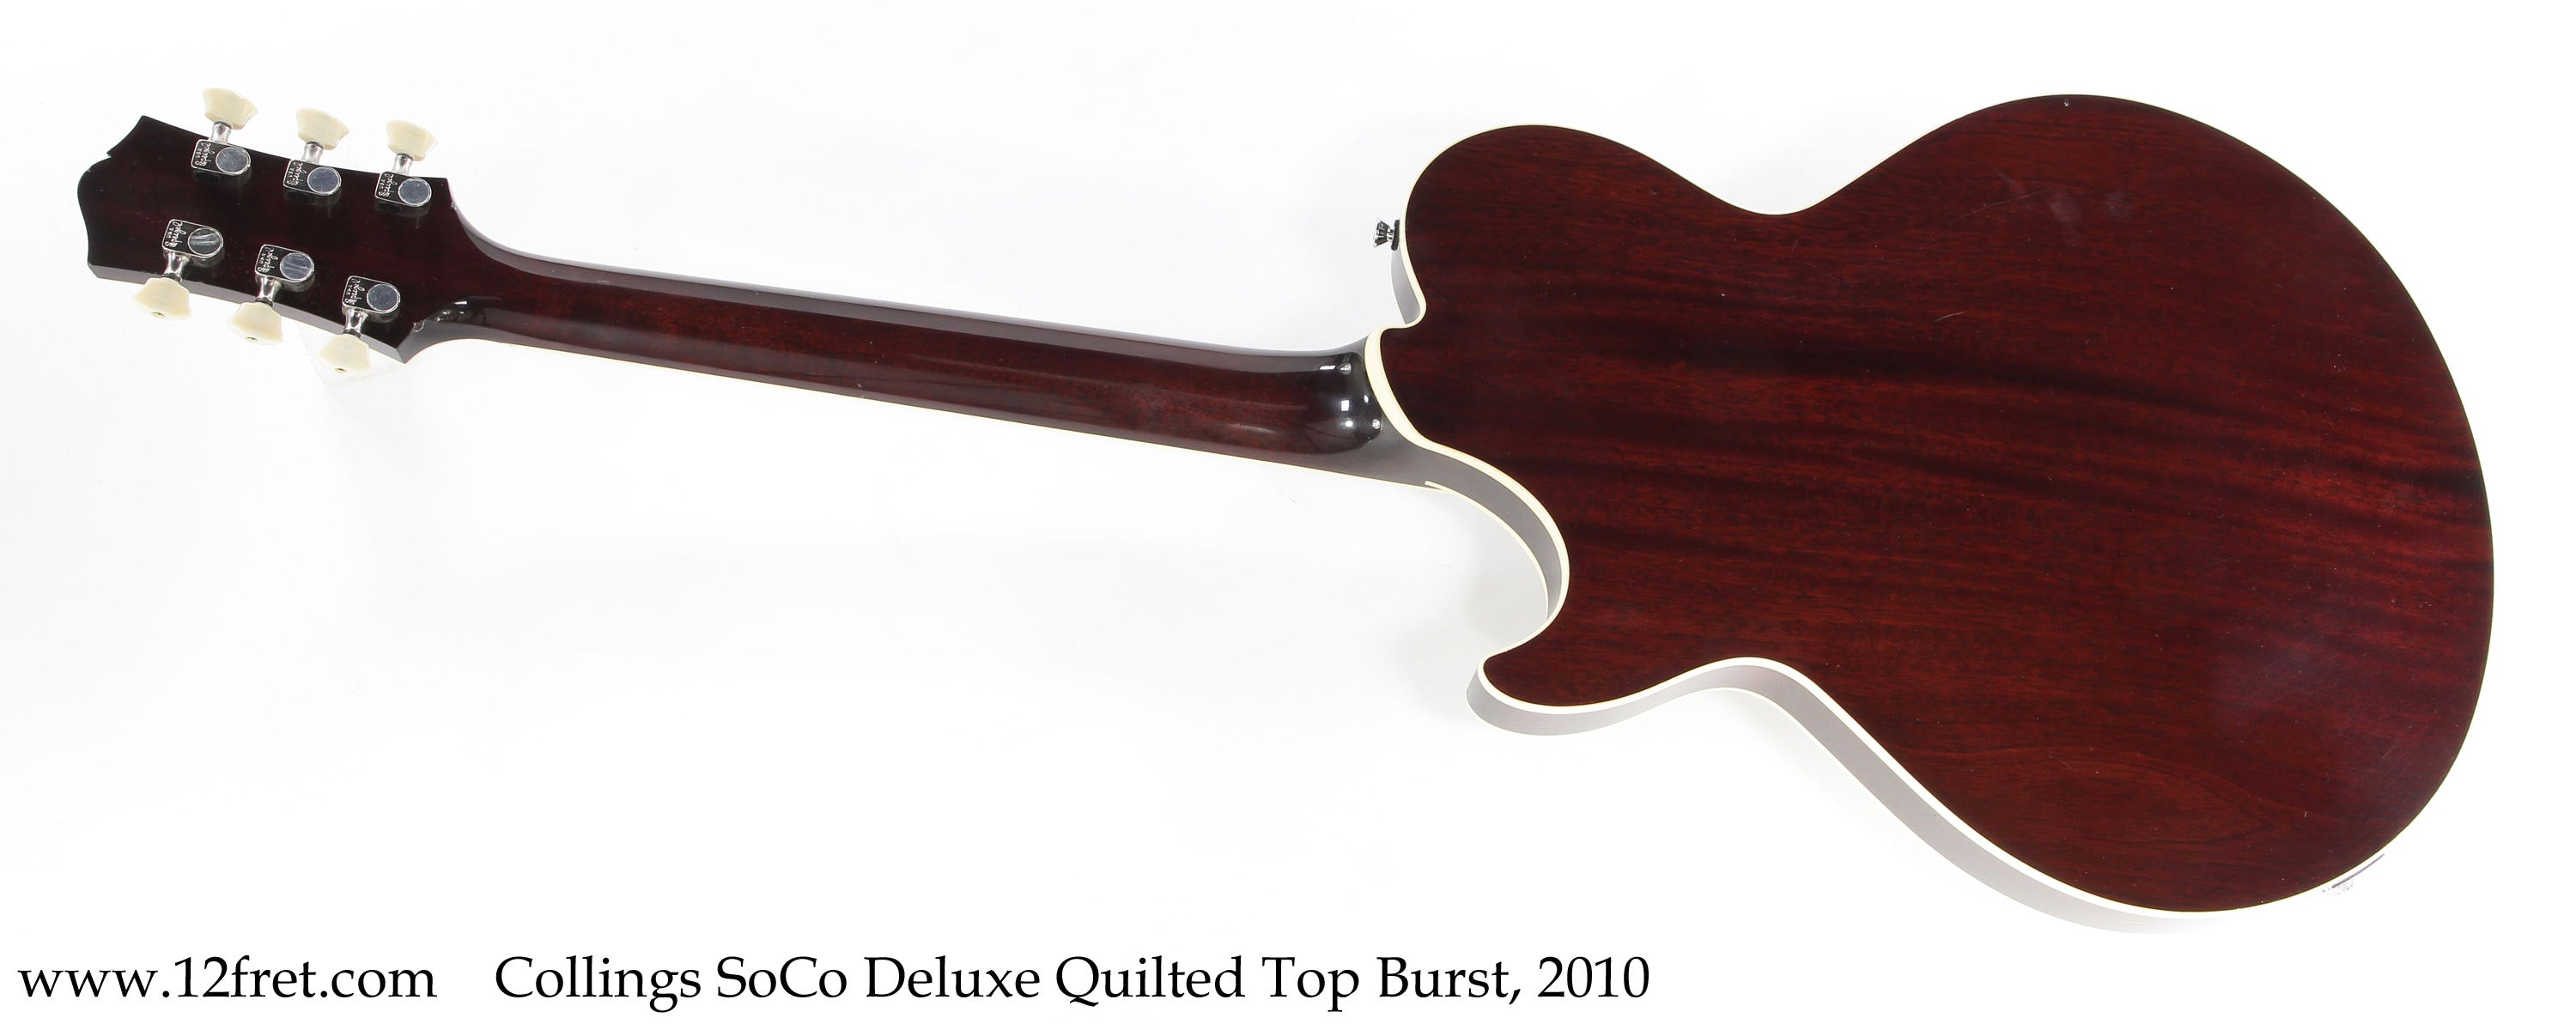 Collings SoCo Deluxe Quilted Top Burst, 2010 - The Twelfth Fret